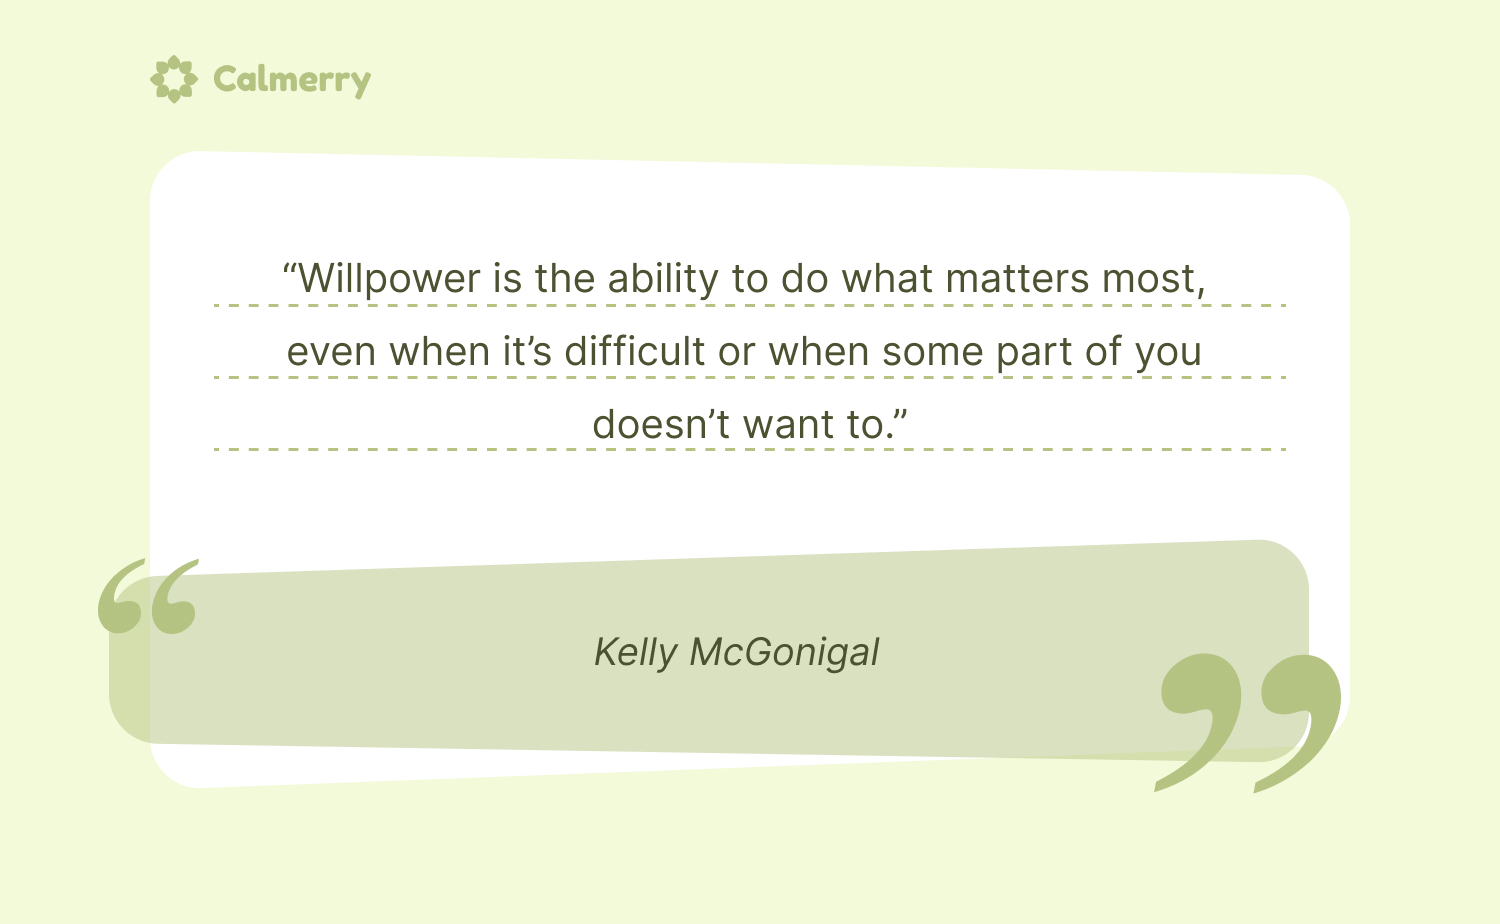 Stanford University psychologist, Kelly McGonigal, defines willpower as “the ability to do what matters most, even when it’s difficult or when some part of you doesn’t want to.” 